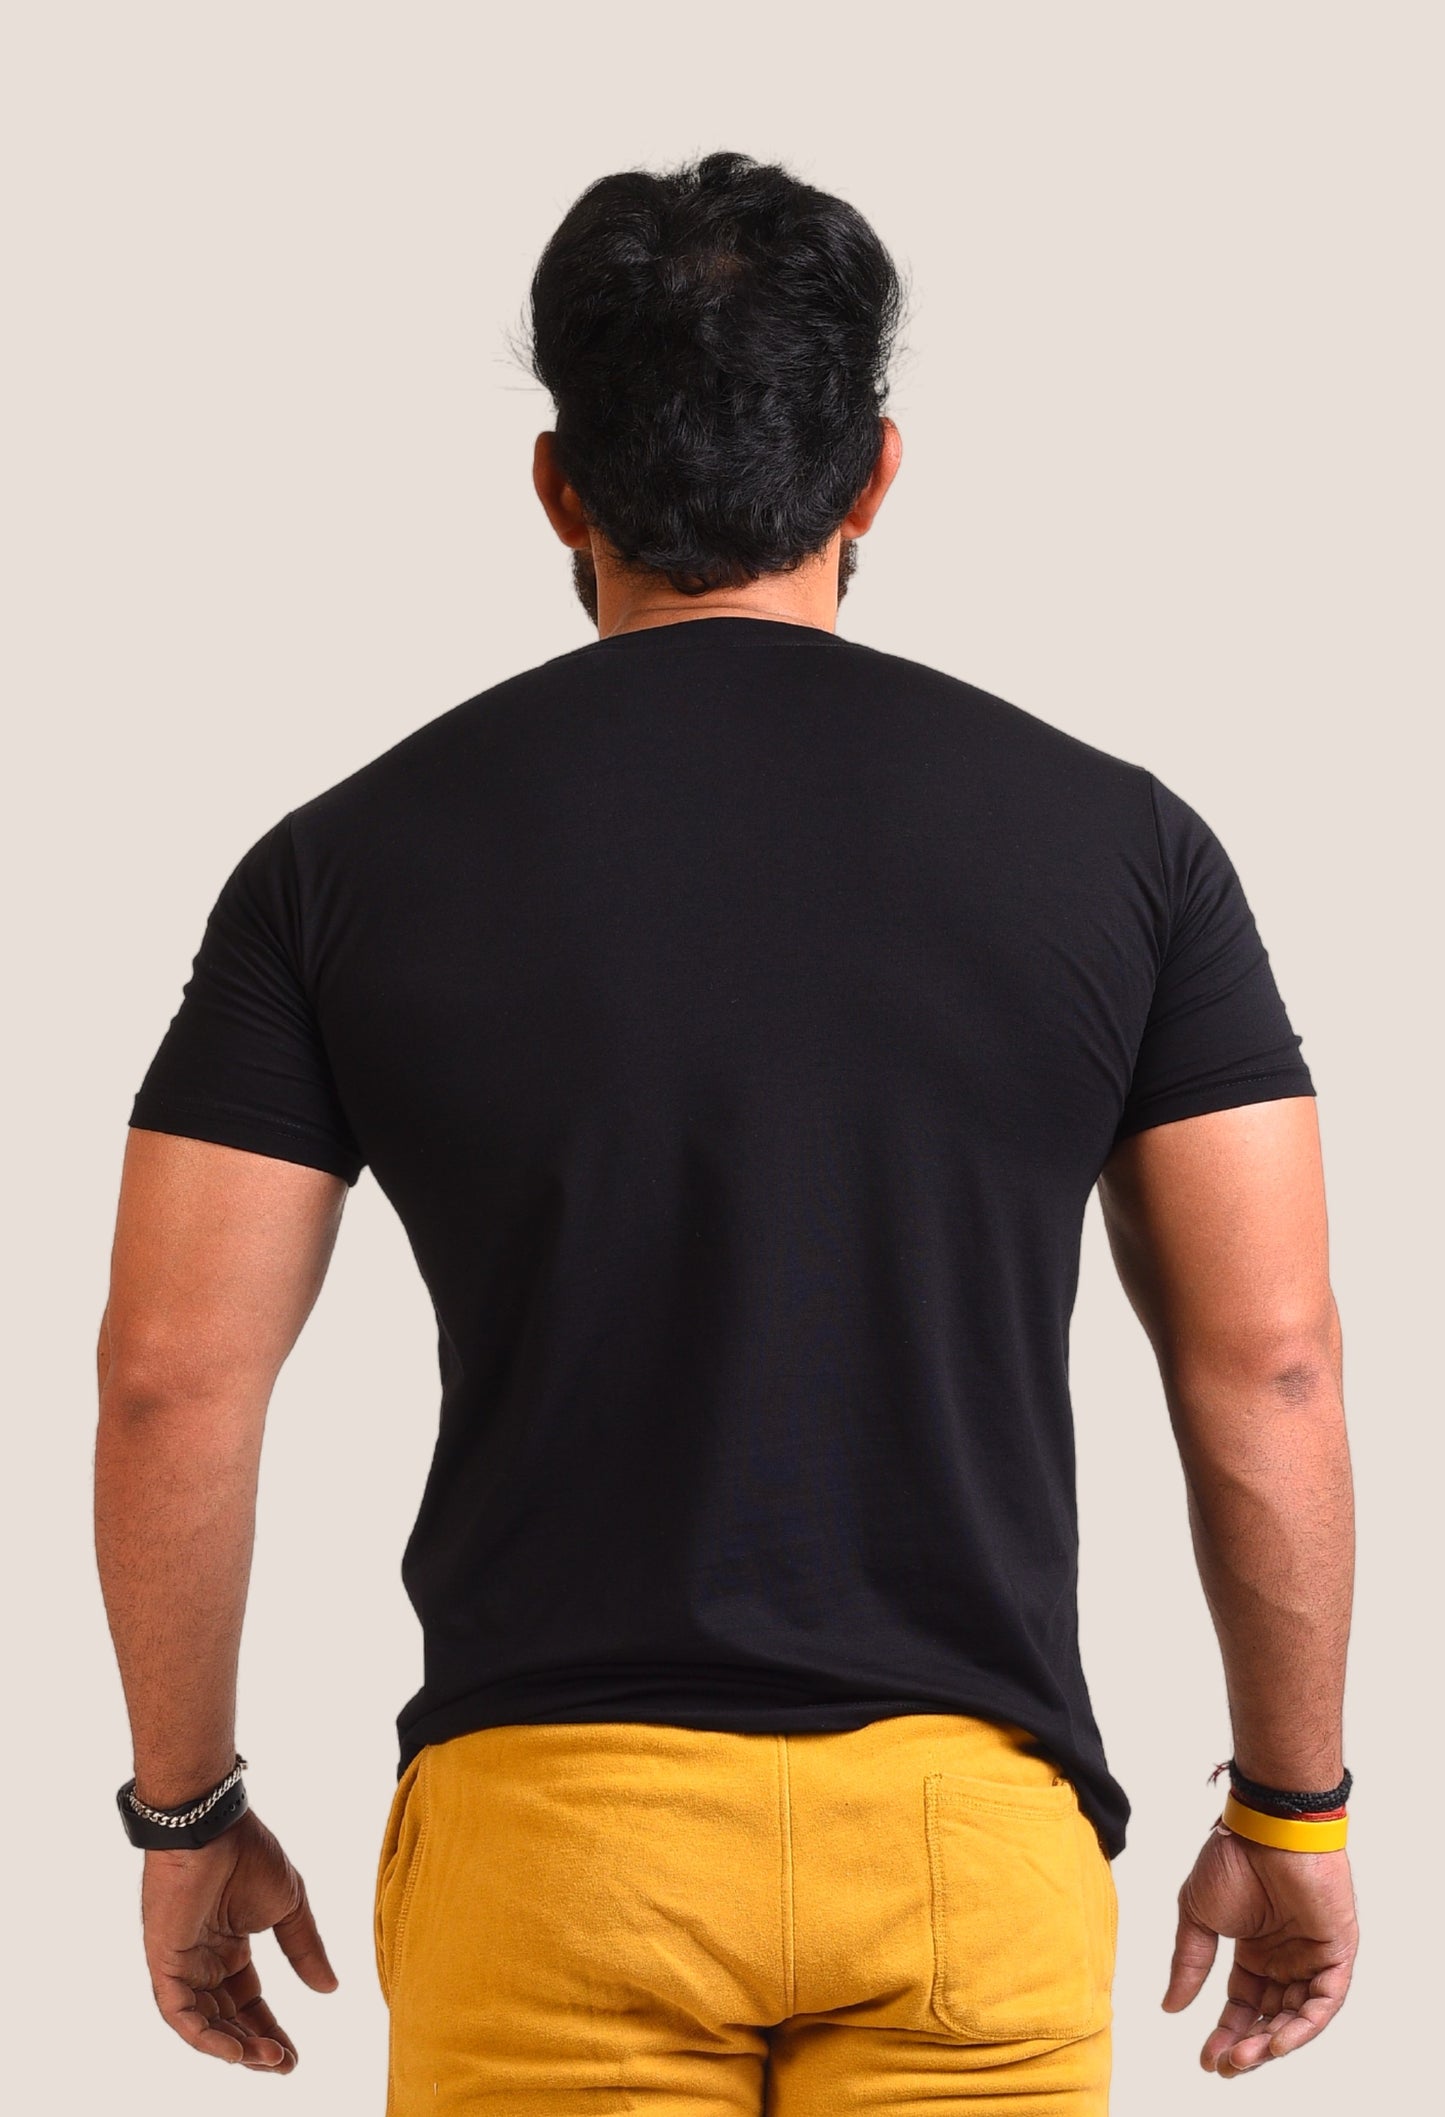 Gym T Shirt - When Dues Are Paid Gains Are Made with premium cotton Lycra. The Sports T Shirt by Strong Soul